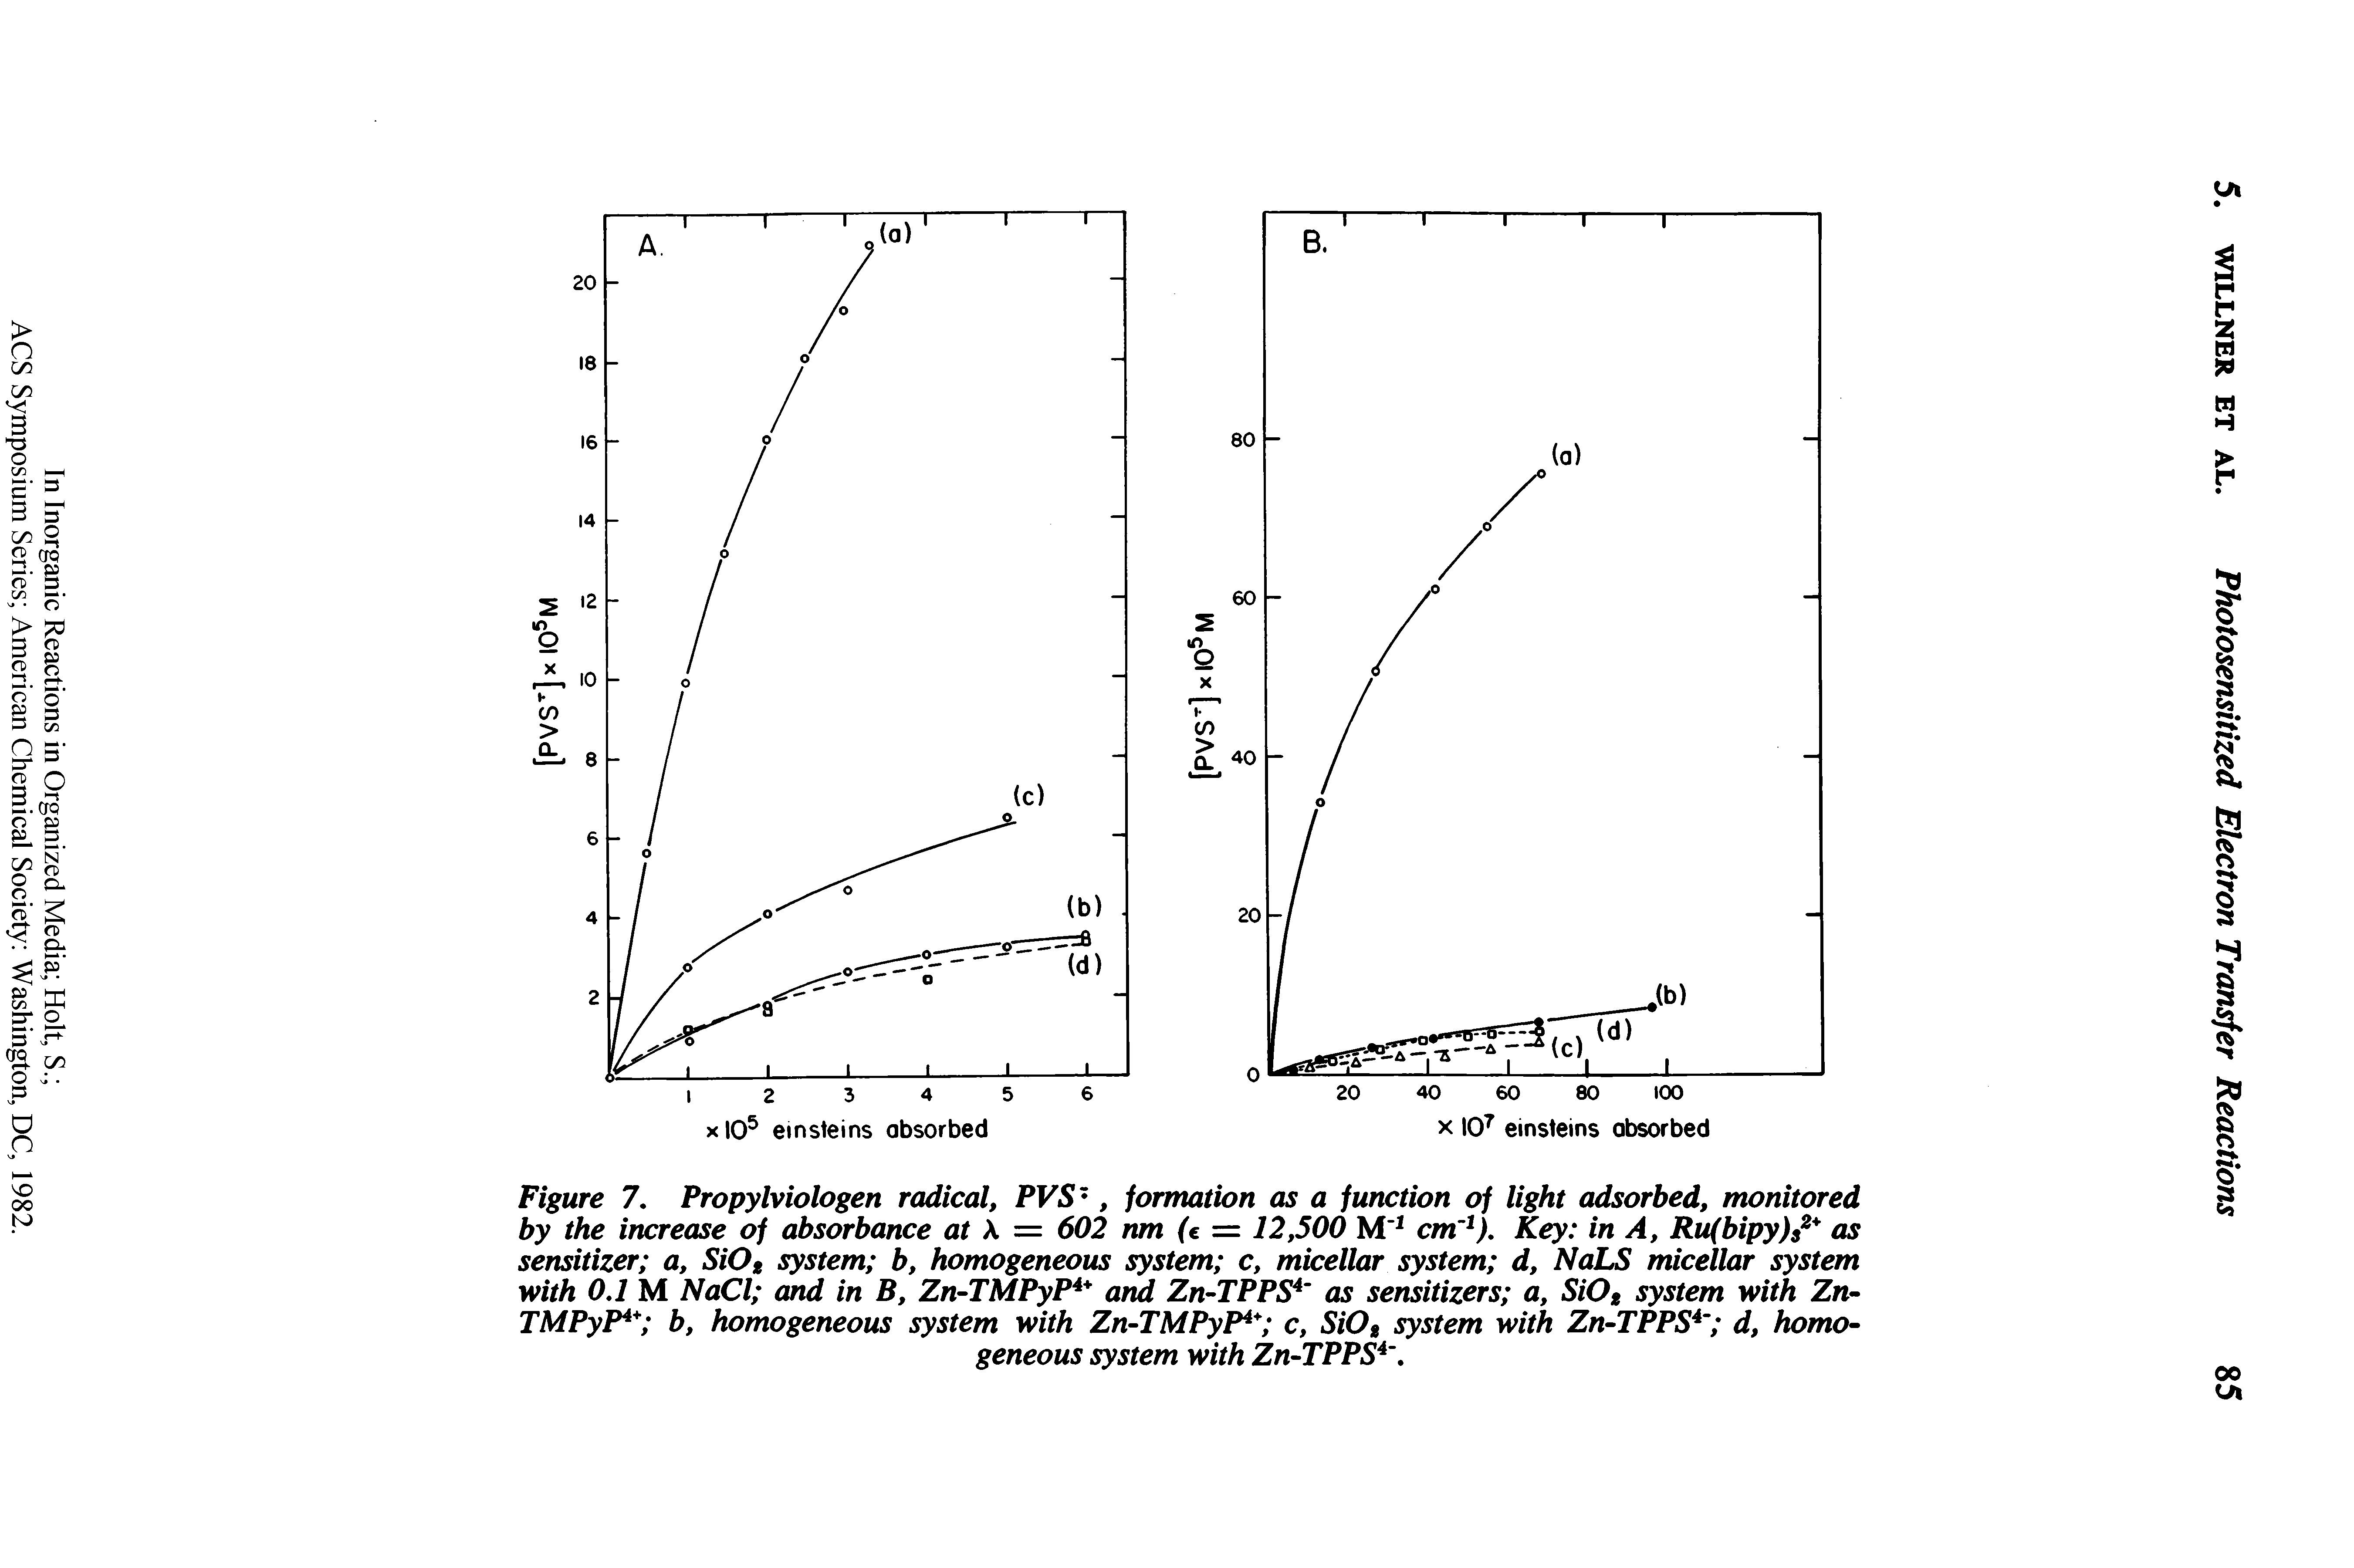 Figure 7. Propylviologen radical, PVS, formation as a function of light adsorbed, monitored by the increase of absorbance at = 602 nm (e = 12,500 M cm ). Key in A, Ru(bipy)s as sensitizer a, SiOt system b, homogeneous system c, micellar system d, NaLS micellar system with 0.7 M NaCl and in B, Zn-TMPyP arid Zn-TPPS as sensitizers a, SiOt system with Zn- TMPyP b, homogeneous system with Zn-ThiPyP "" c, SiOg system with Zn-TPPS d, homo-...